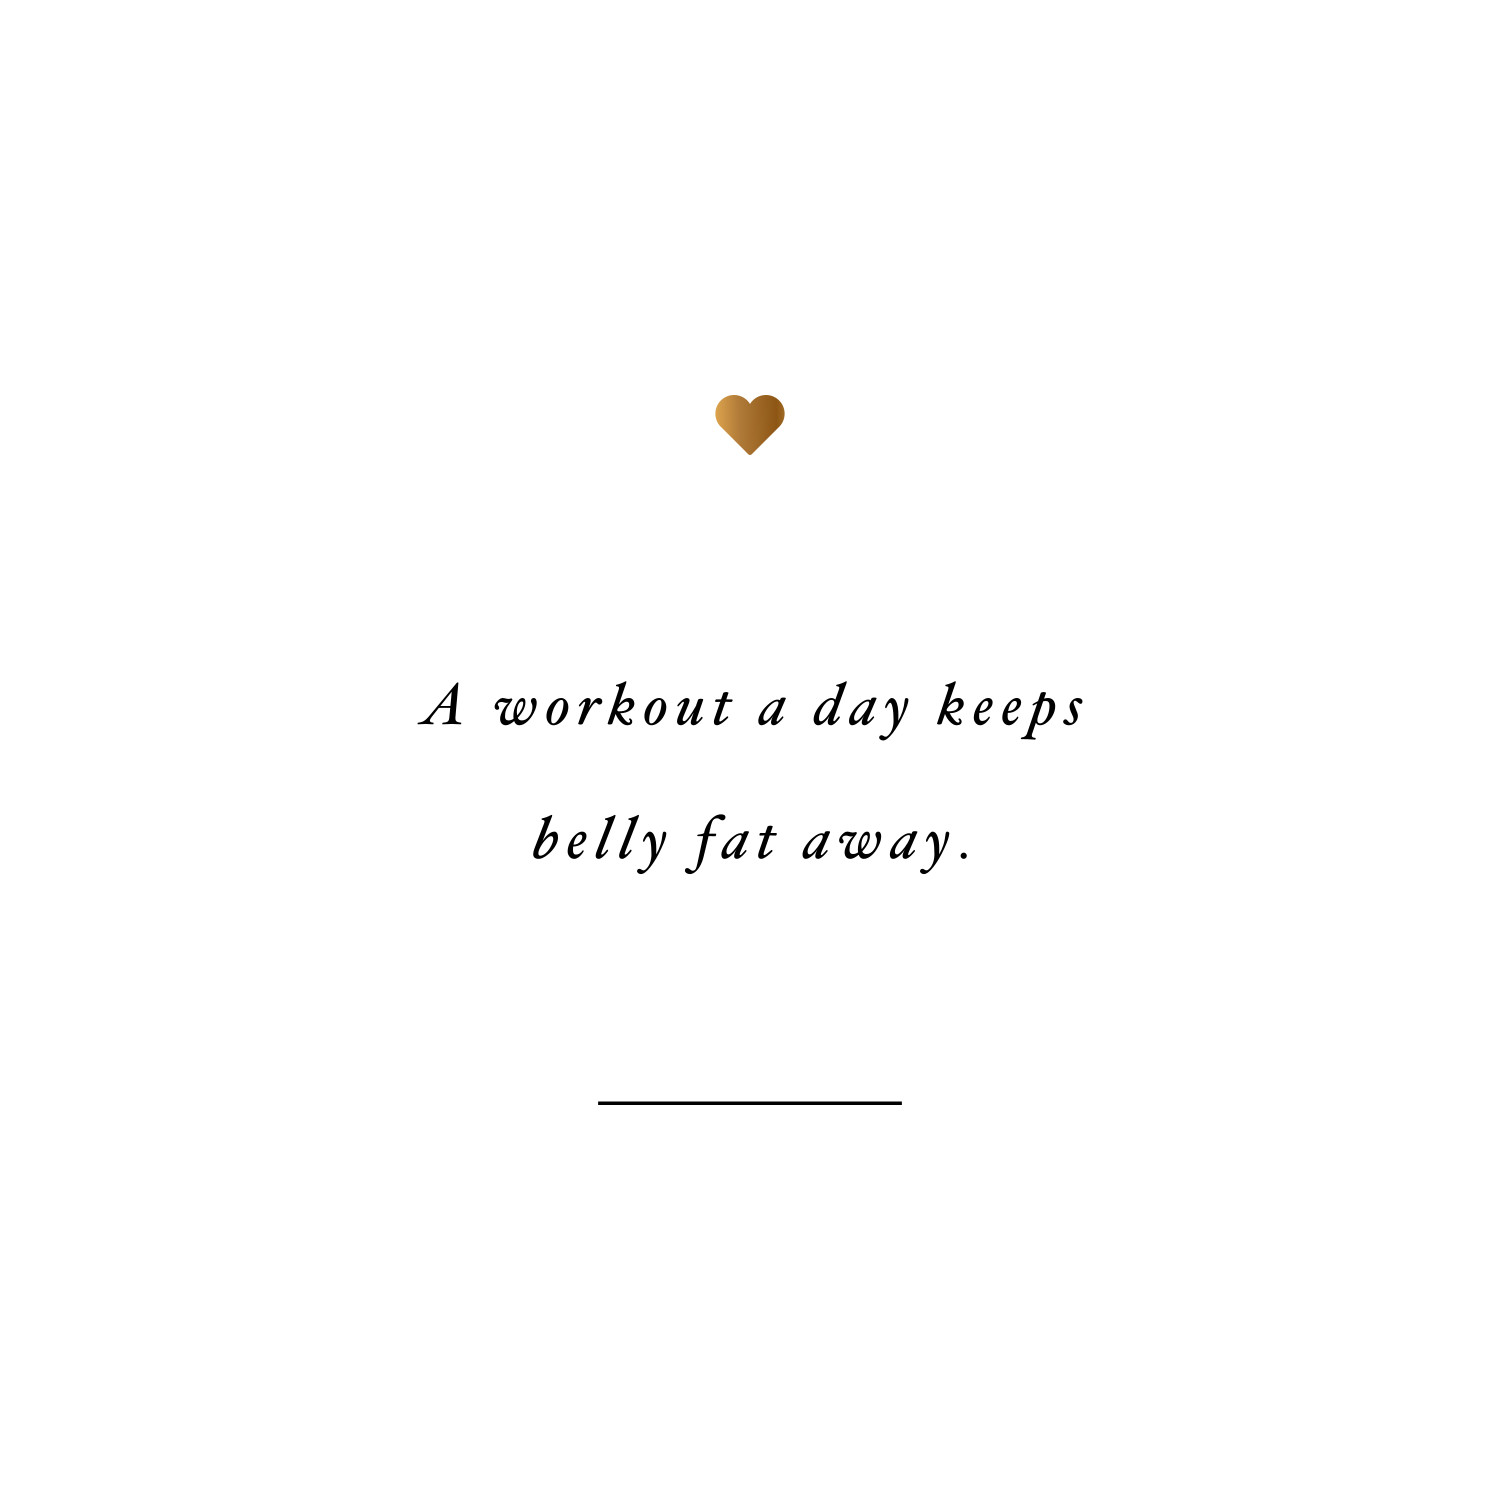 A workout a day keeps belly fat away! Browse our collection of motivational health and weight loss quotes and get instant wellness and fitness inspiration. Transform positive thoughts into positive actions and get fit, healthy and happy! https://www.spotebi.com/workout-motivation/a-workout-a-day-keeps-belly-fat-away/